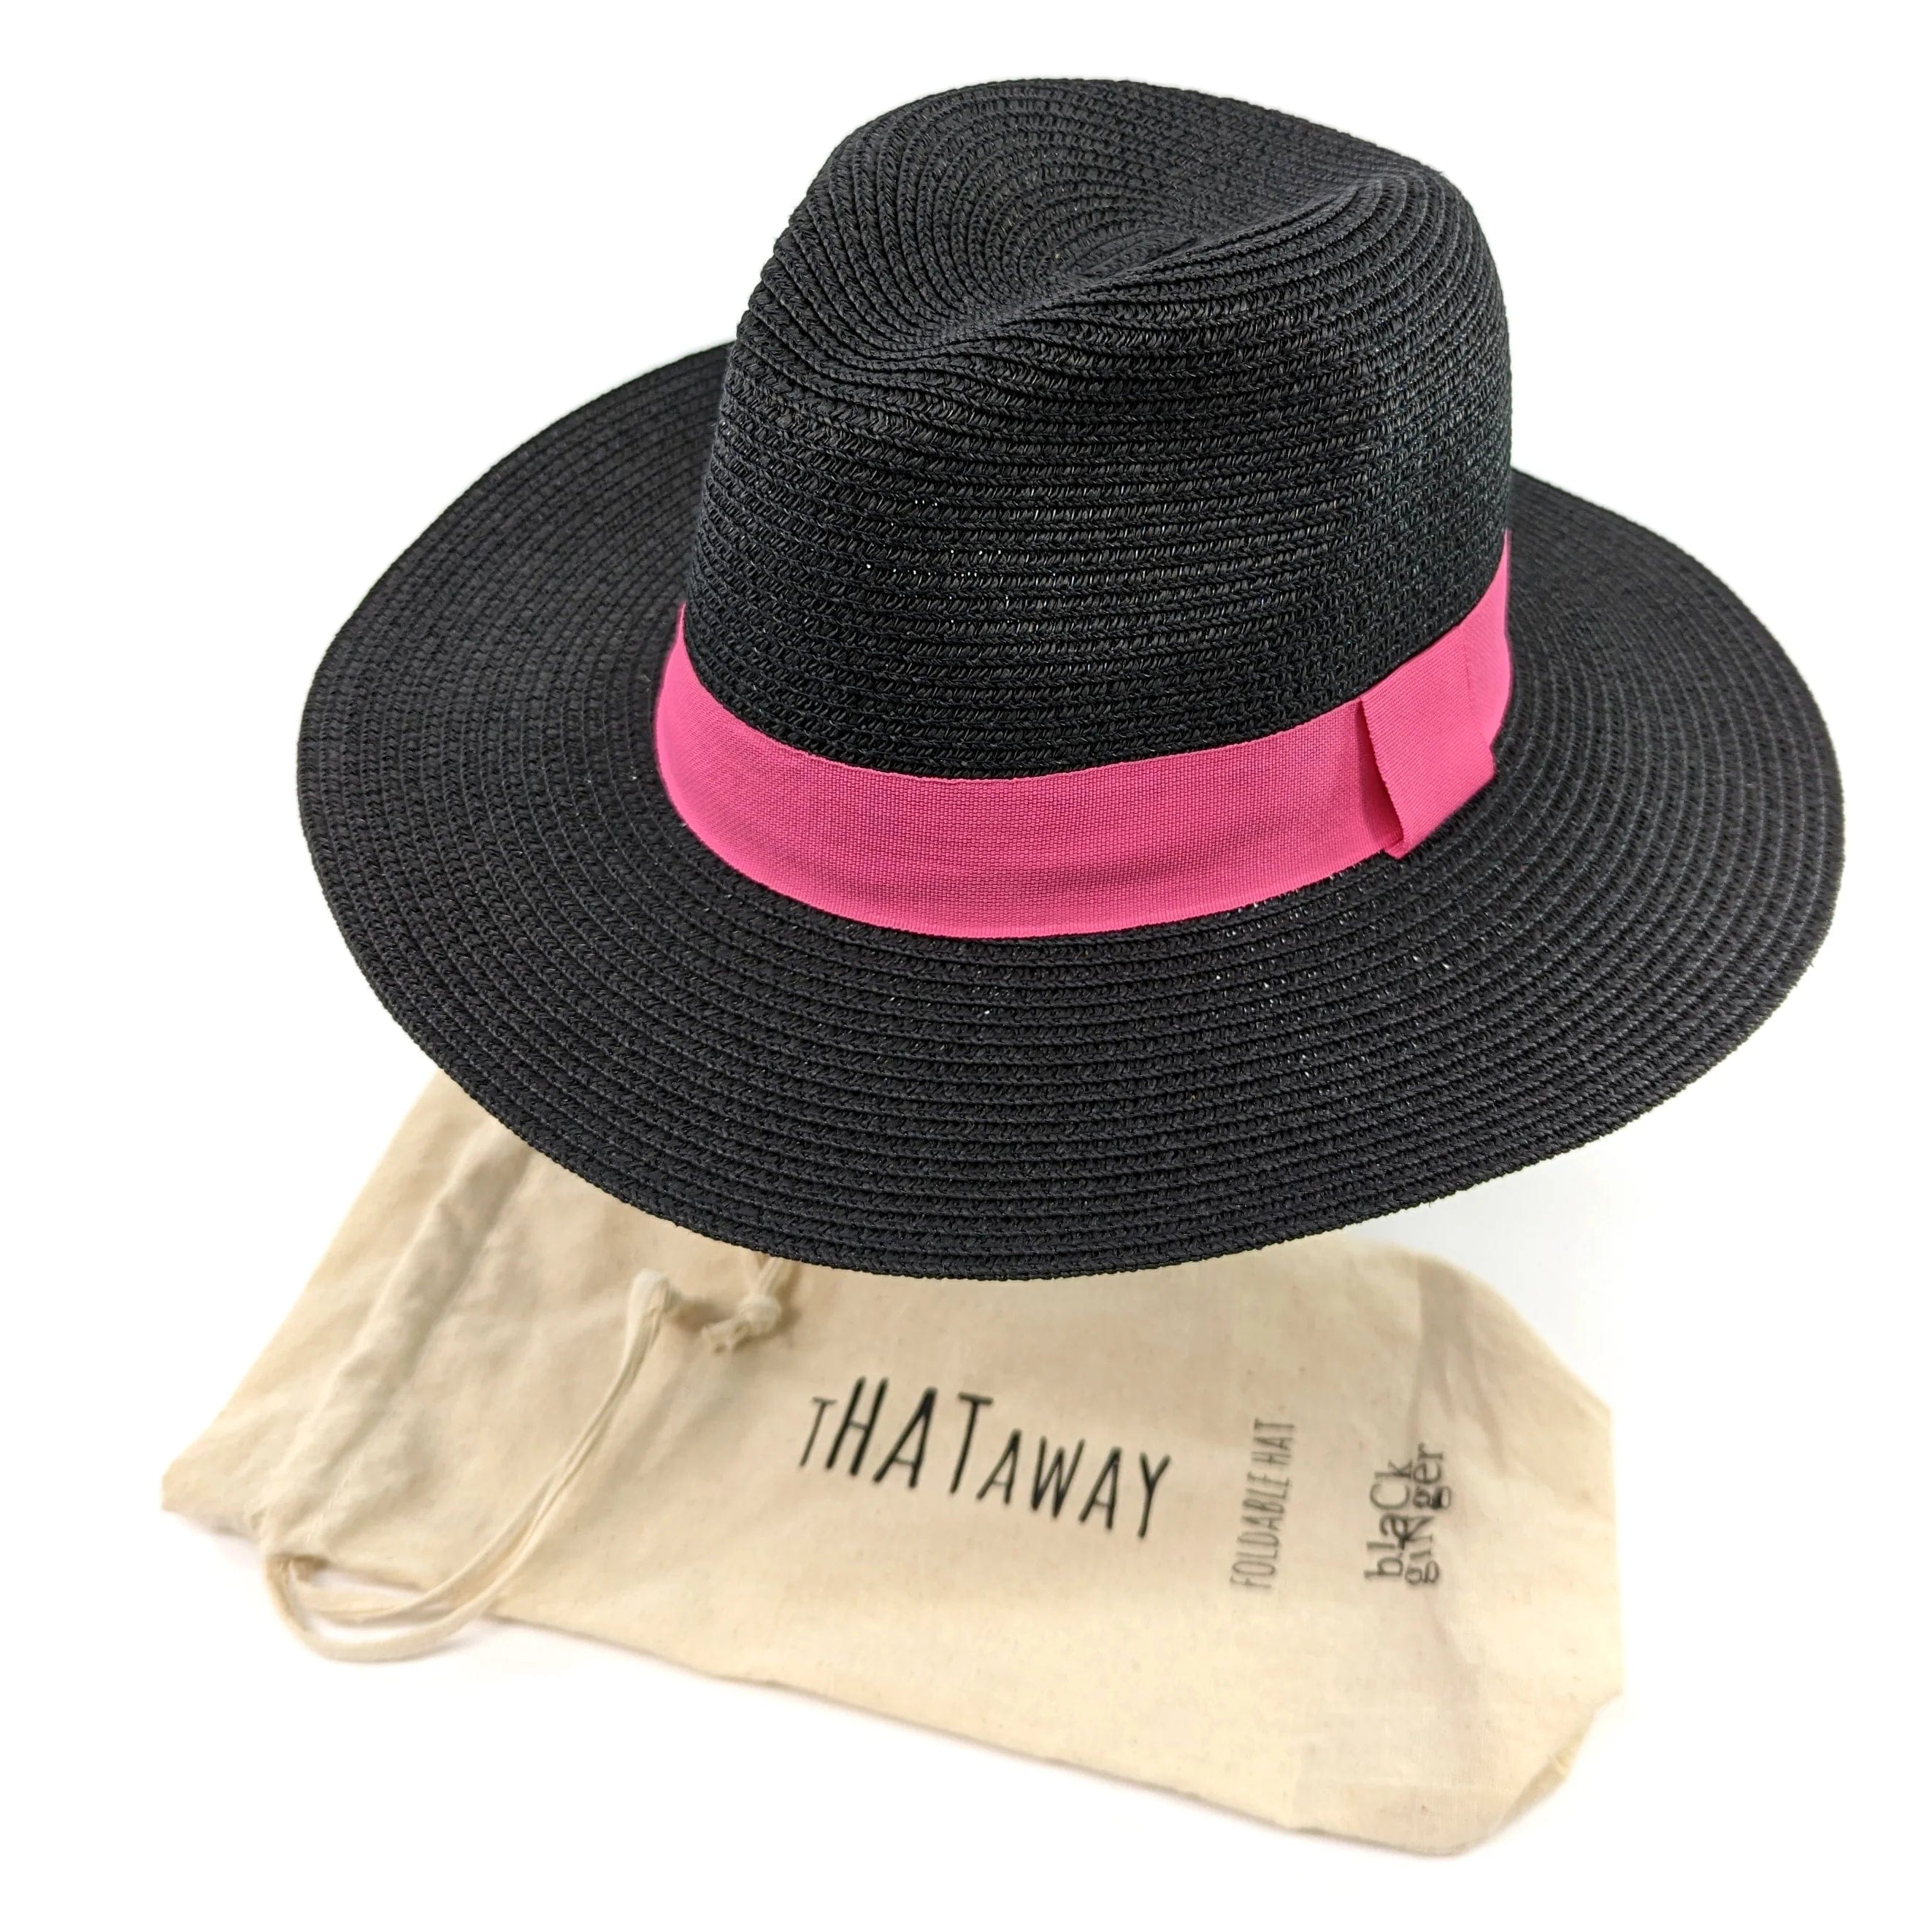 lusciousscarves Black and Pink Panama Style Sun Hat , Rollable and Packable